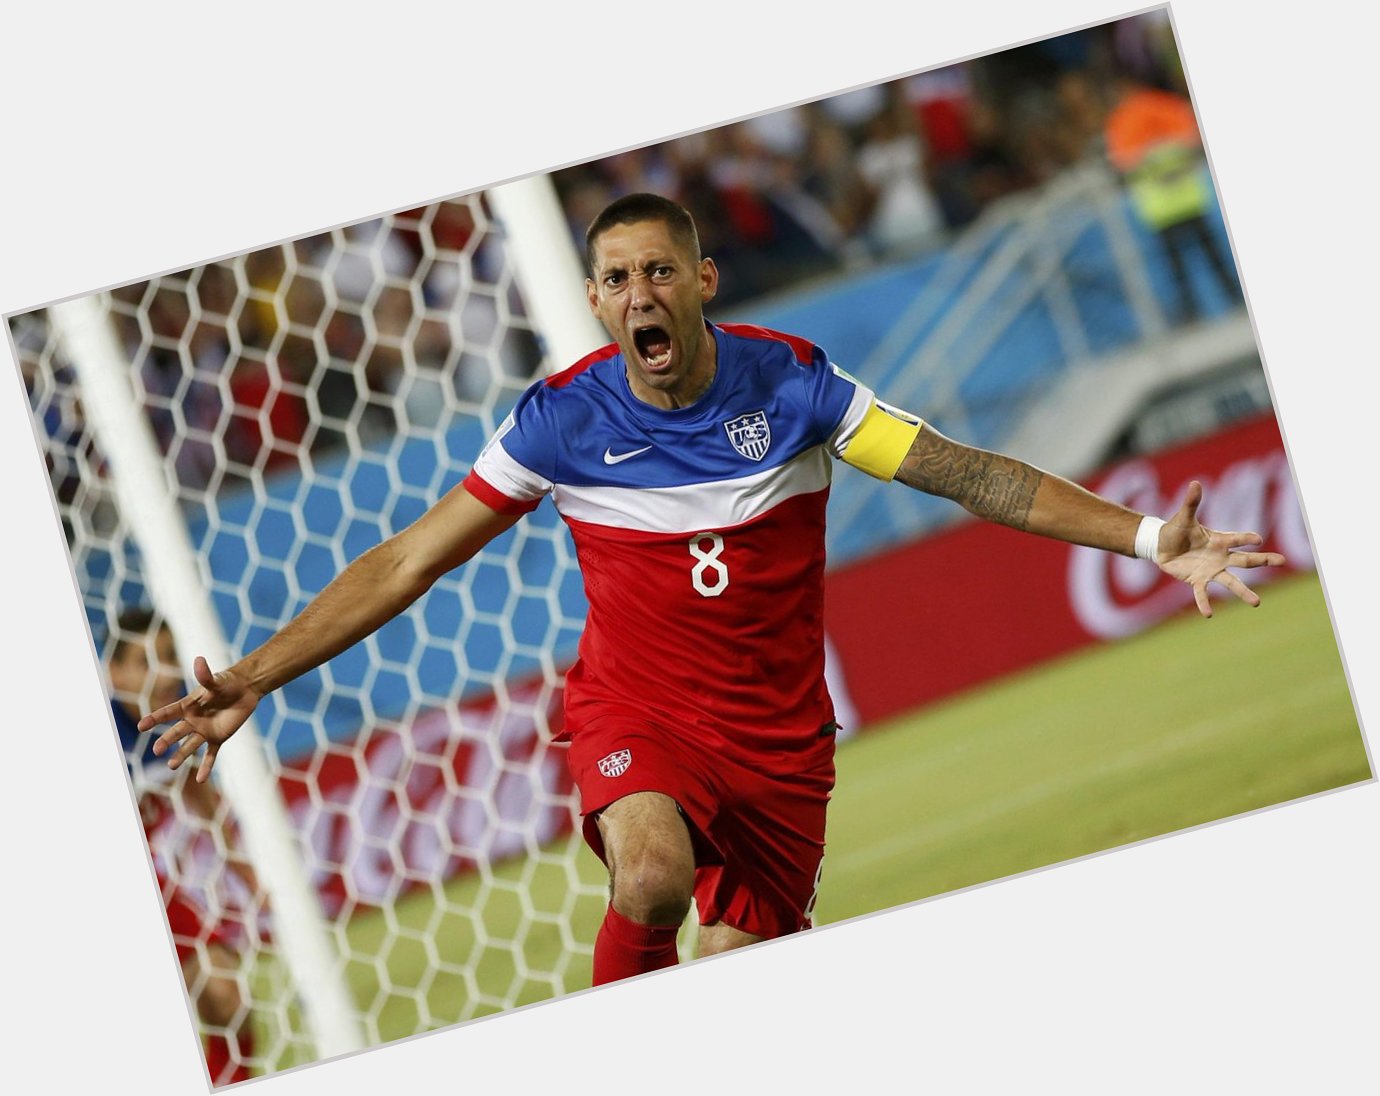 Happy 32nd birthday to Clint Dempsey. He\s scored 40 goals in 112 caps for the USA national team. The Deuce. 